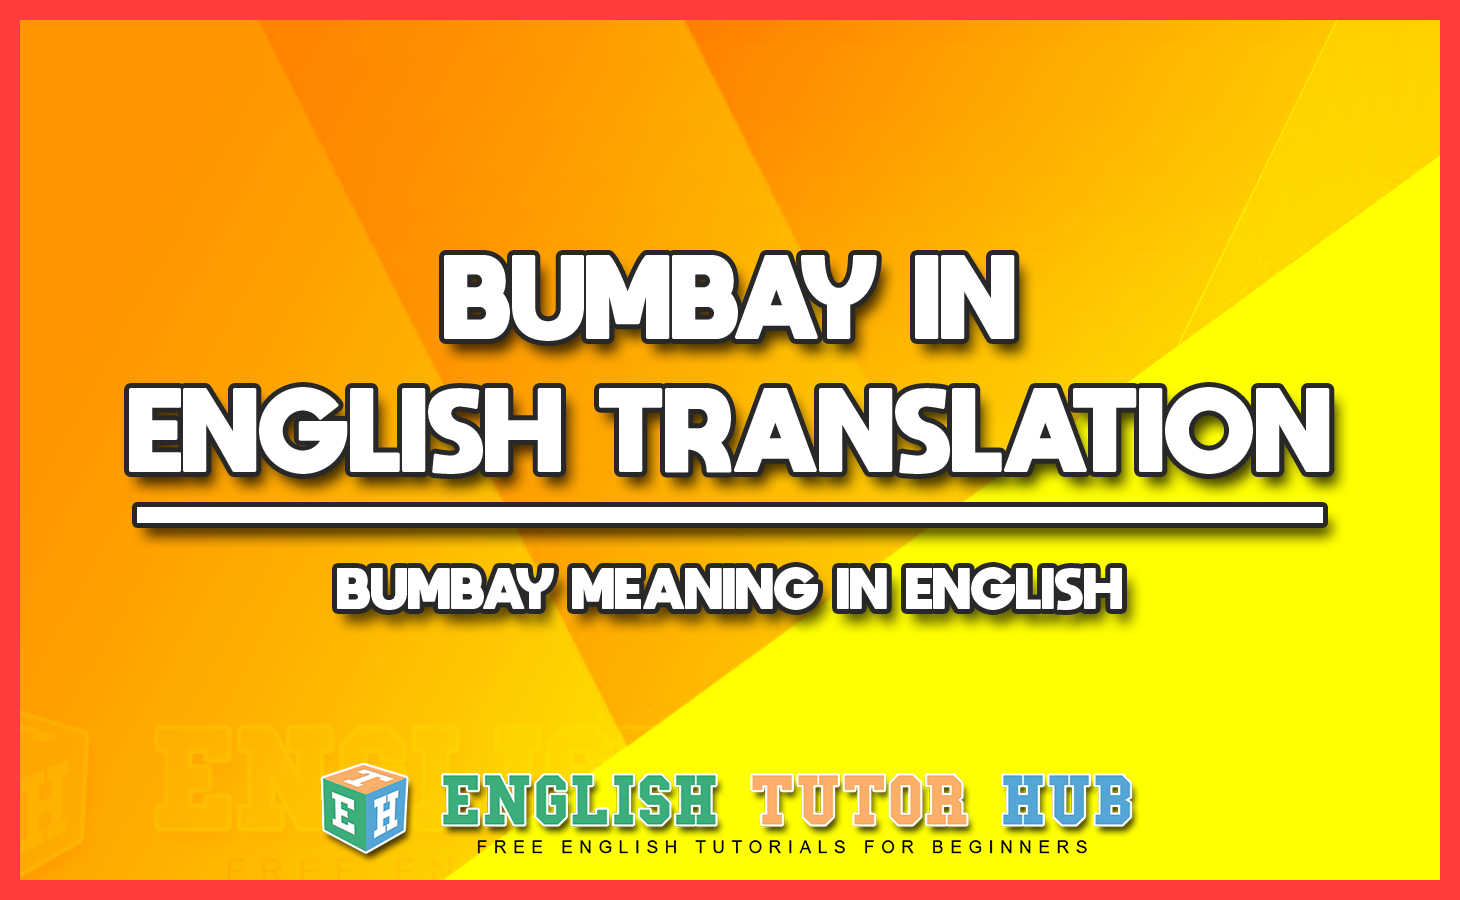 BUMBAY IN ENGLISH TRANSLATION - BUMBAY MEANING IN ENGLISH